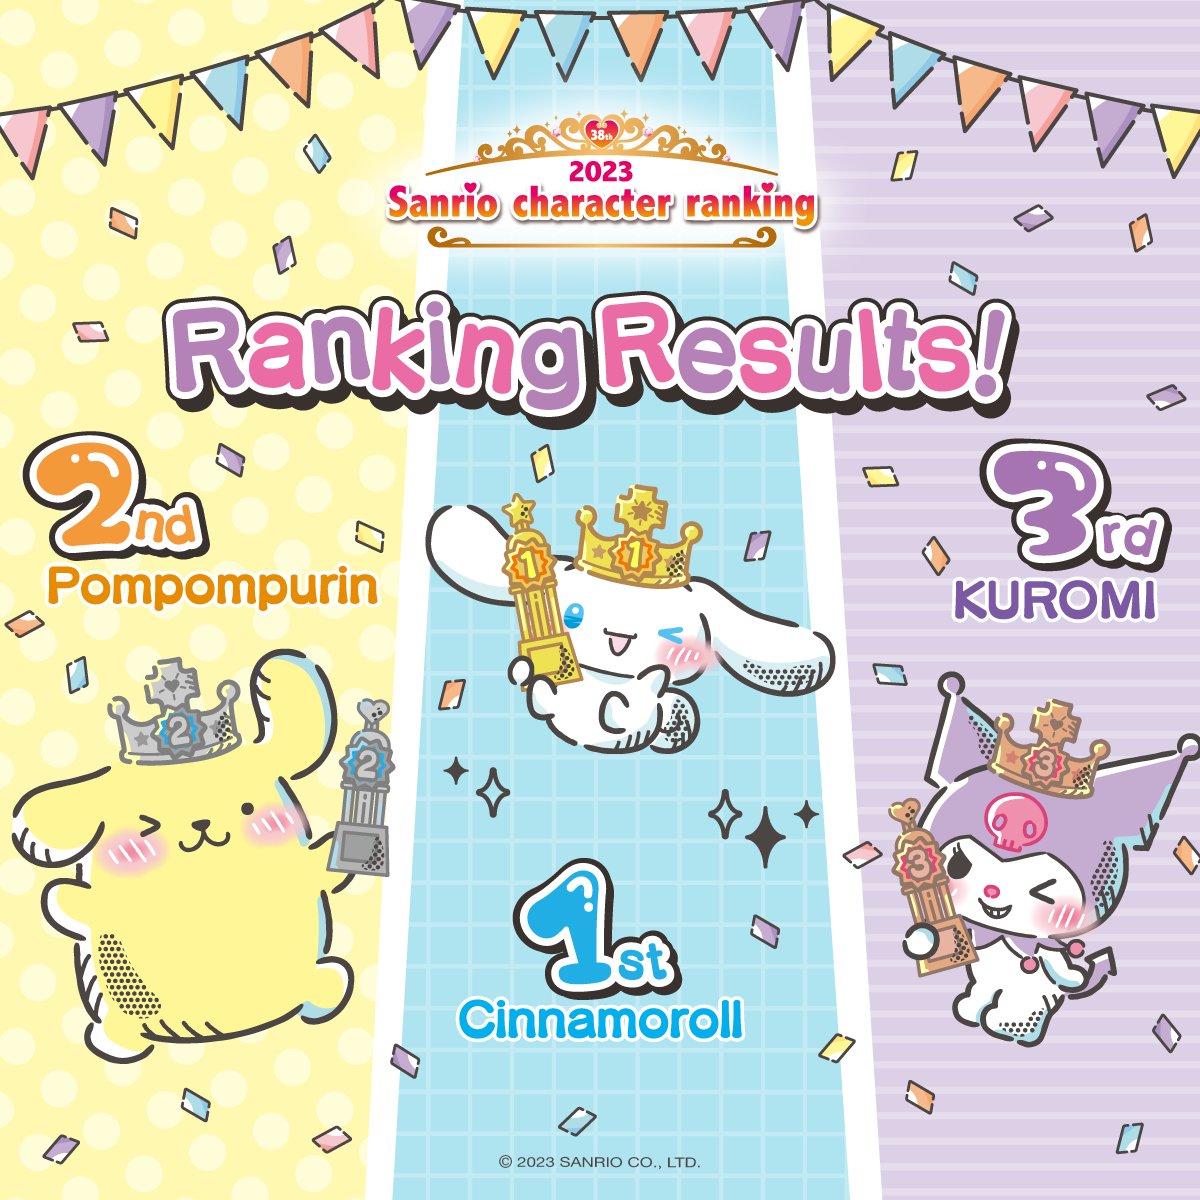 🏆THE RESULTS ARE IN🏆 Congrats to our top 3 winners of the 2023 #SanrioCharacterRanking Contest 👑💖 See the full results here: bit.ly/3NjTlzz